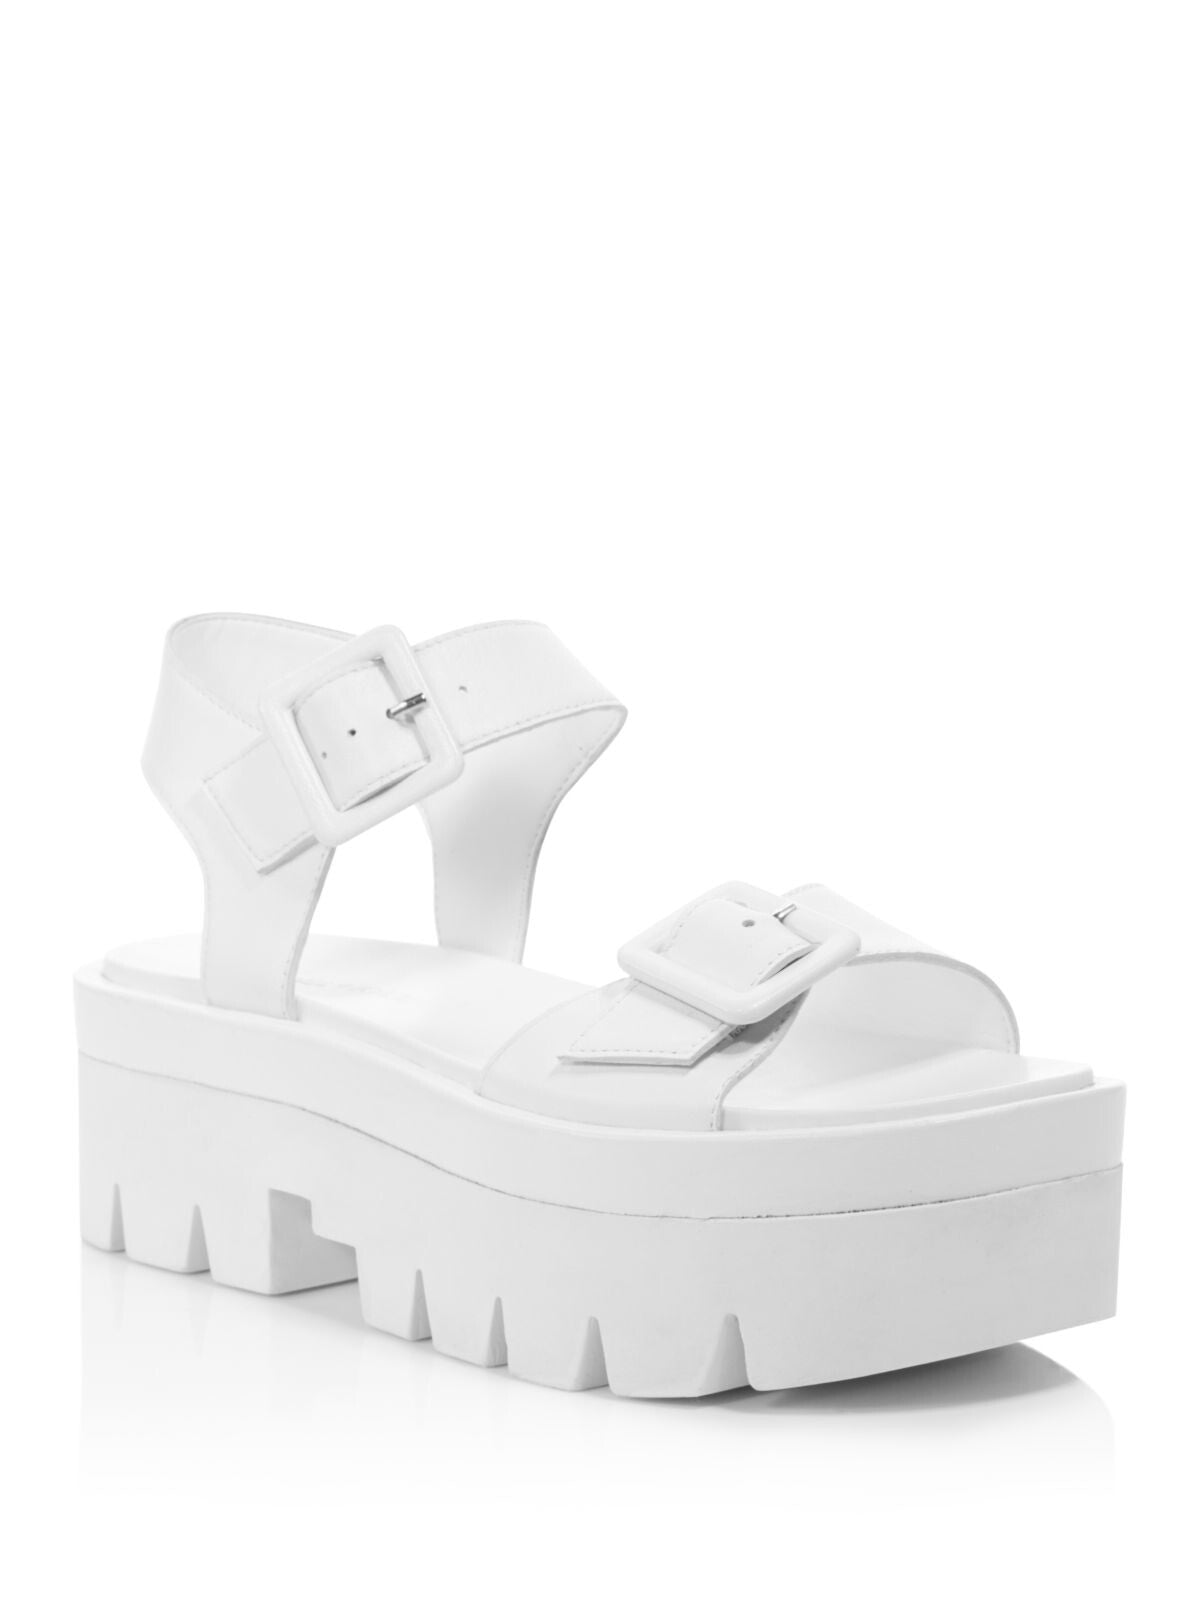 KENDALL + KYLIE Womens White Treaded Sole Ankle Strap Buckle Accent Wave Round Toe Wedge Buckle Leather Sandals Shoes 9 M